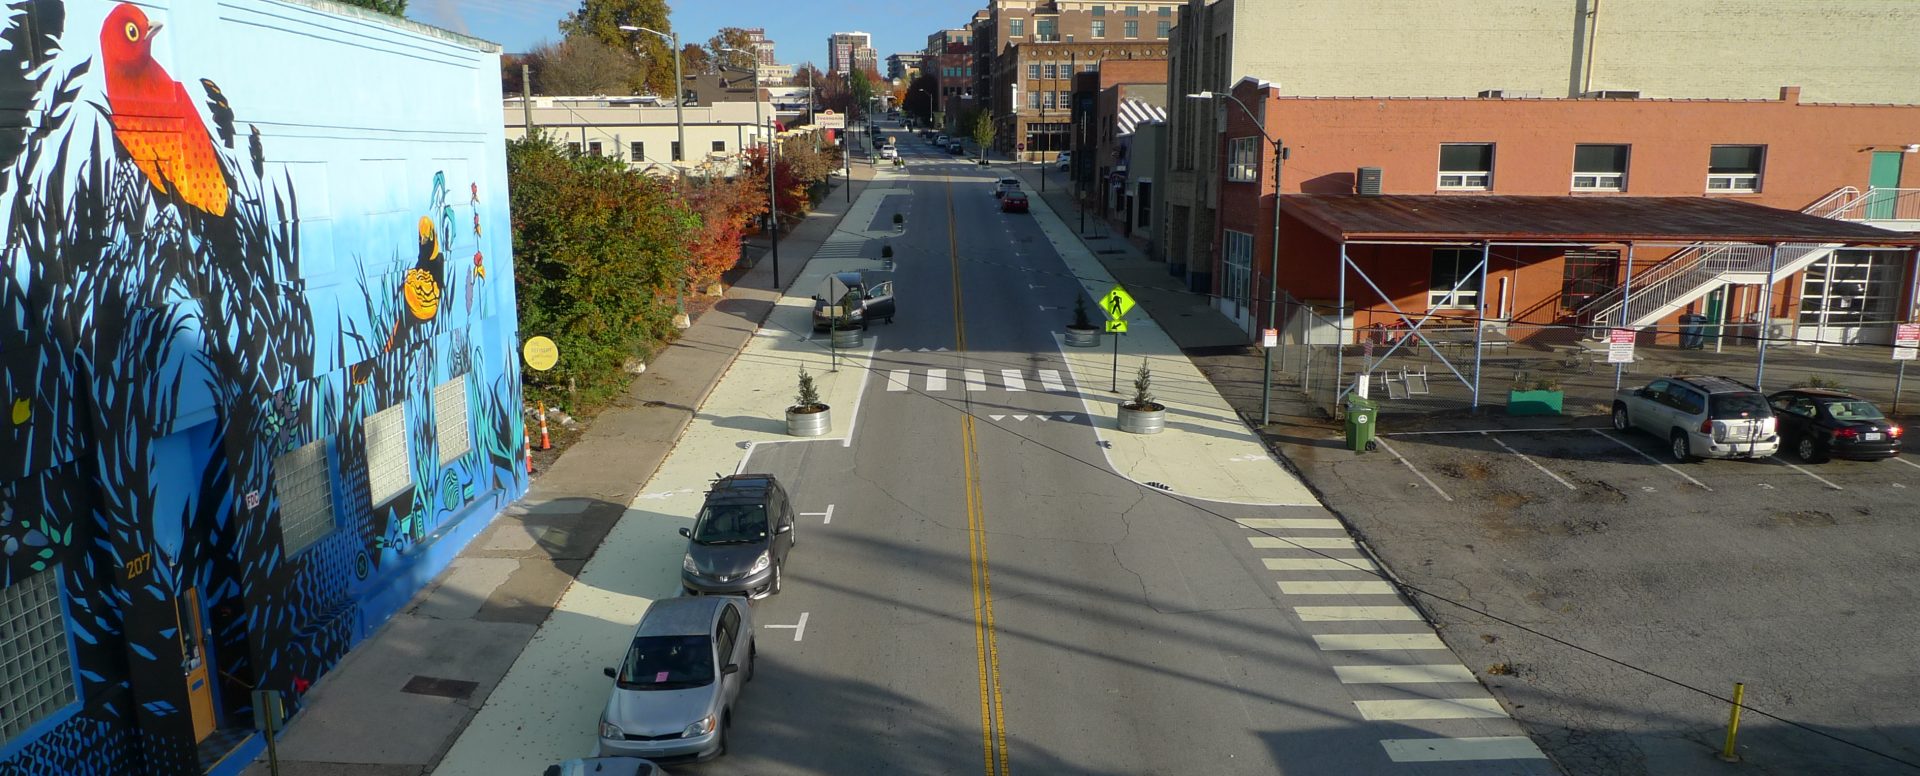 Street Plans to Host Public Workshop in Asheville to Plan Tactical Urbanism Project